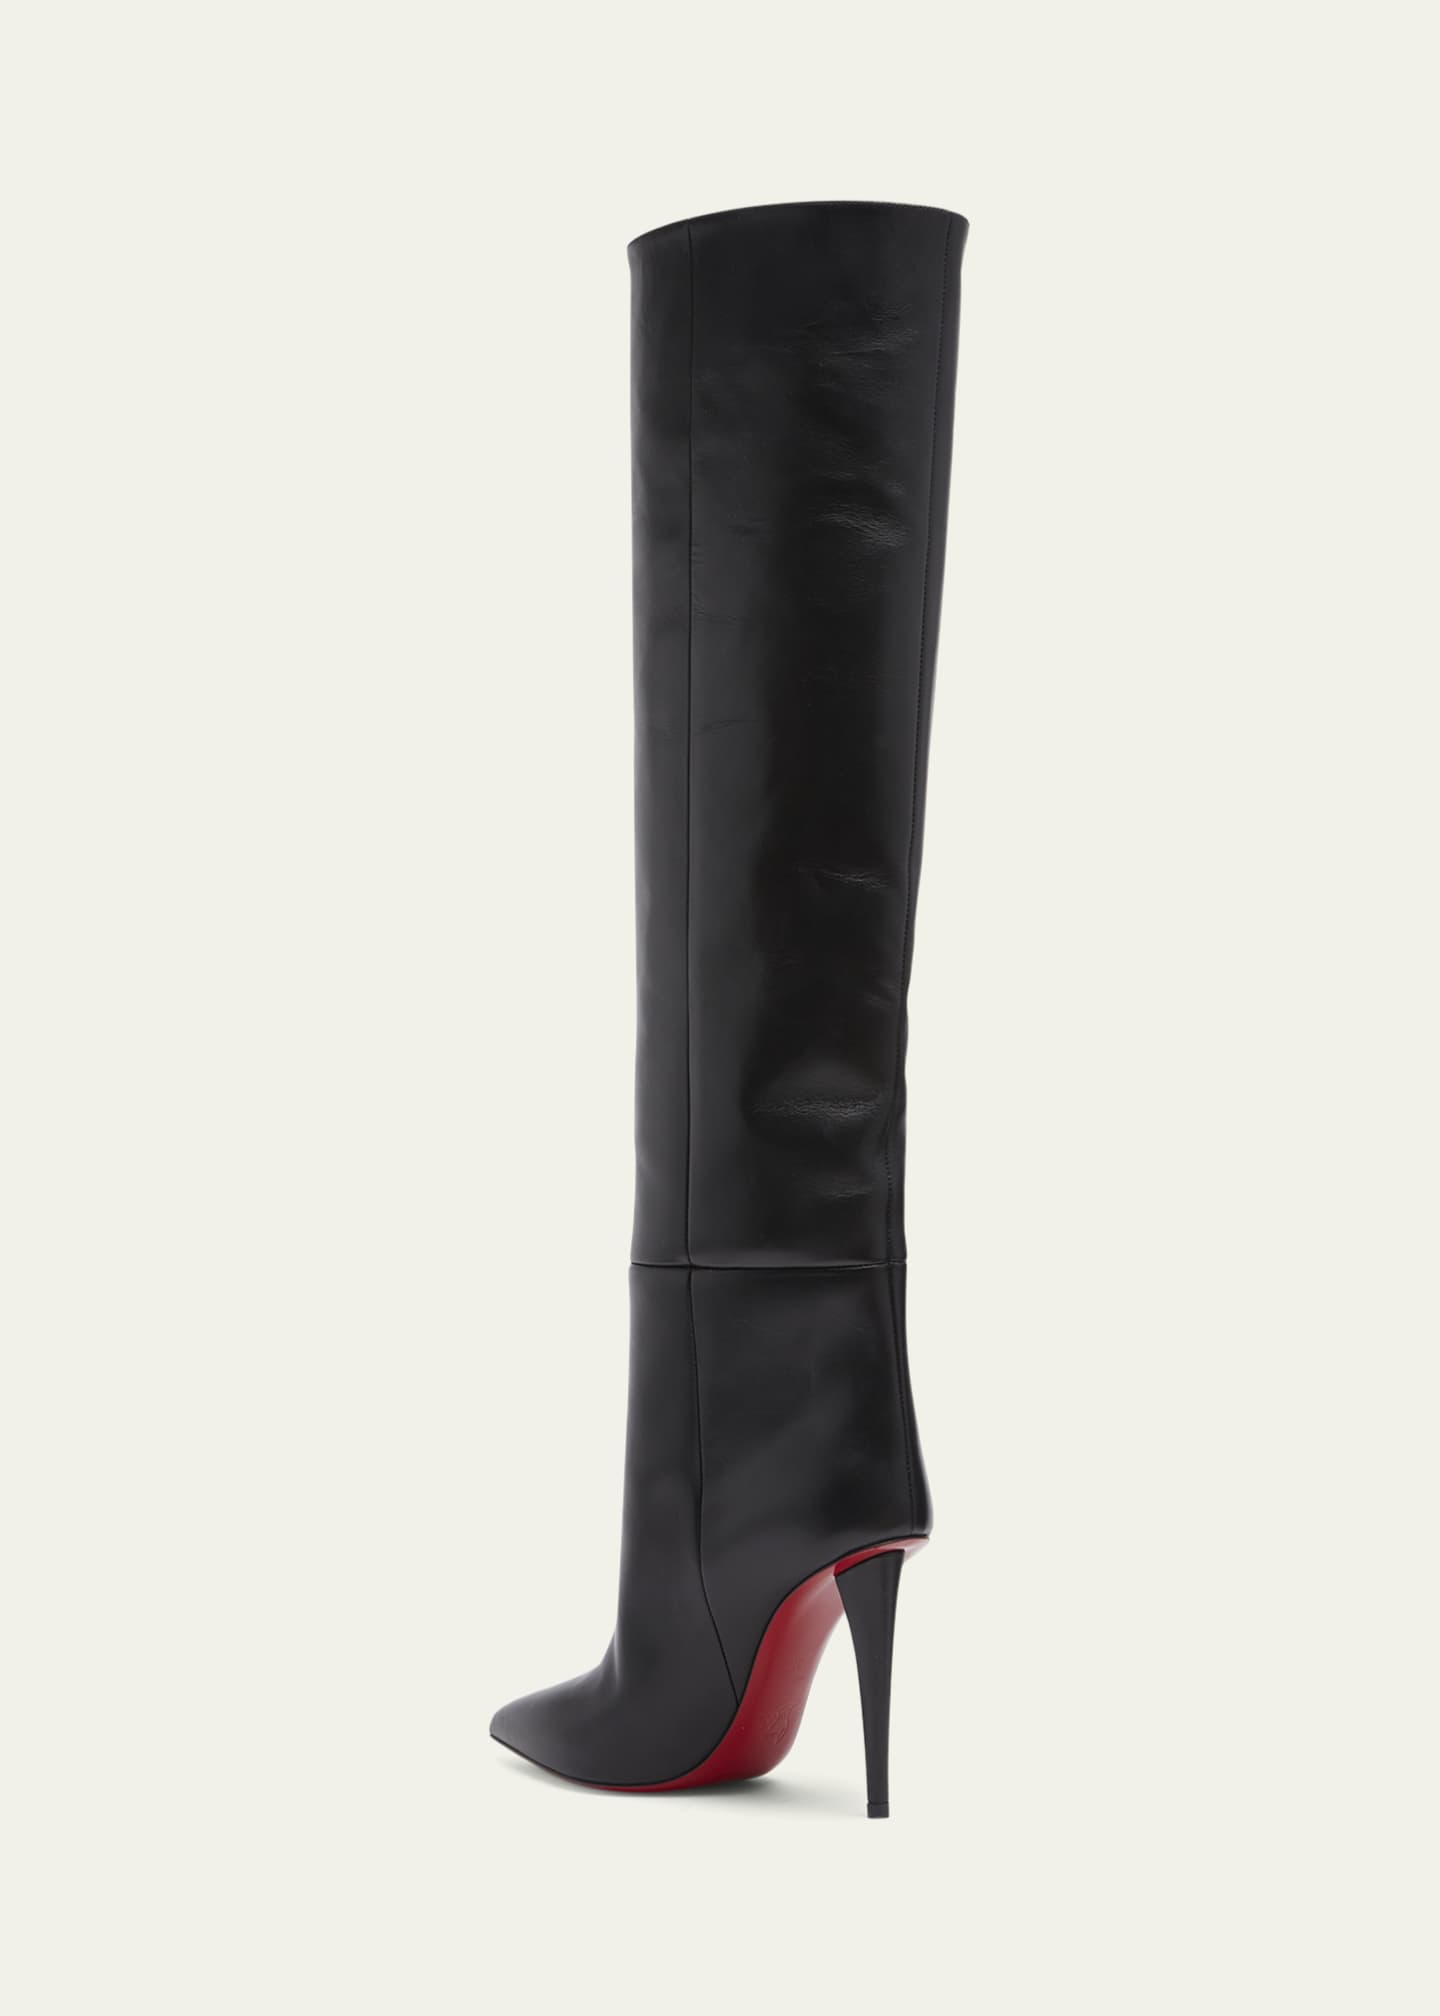 Bred vifte dug nødsituation Christian Louboutin Astrilarge Botta Red Sole Two-Tone Leather Knee-High  Boots - Bergdorf Goodman